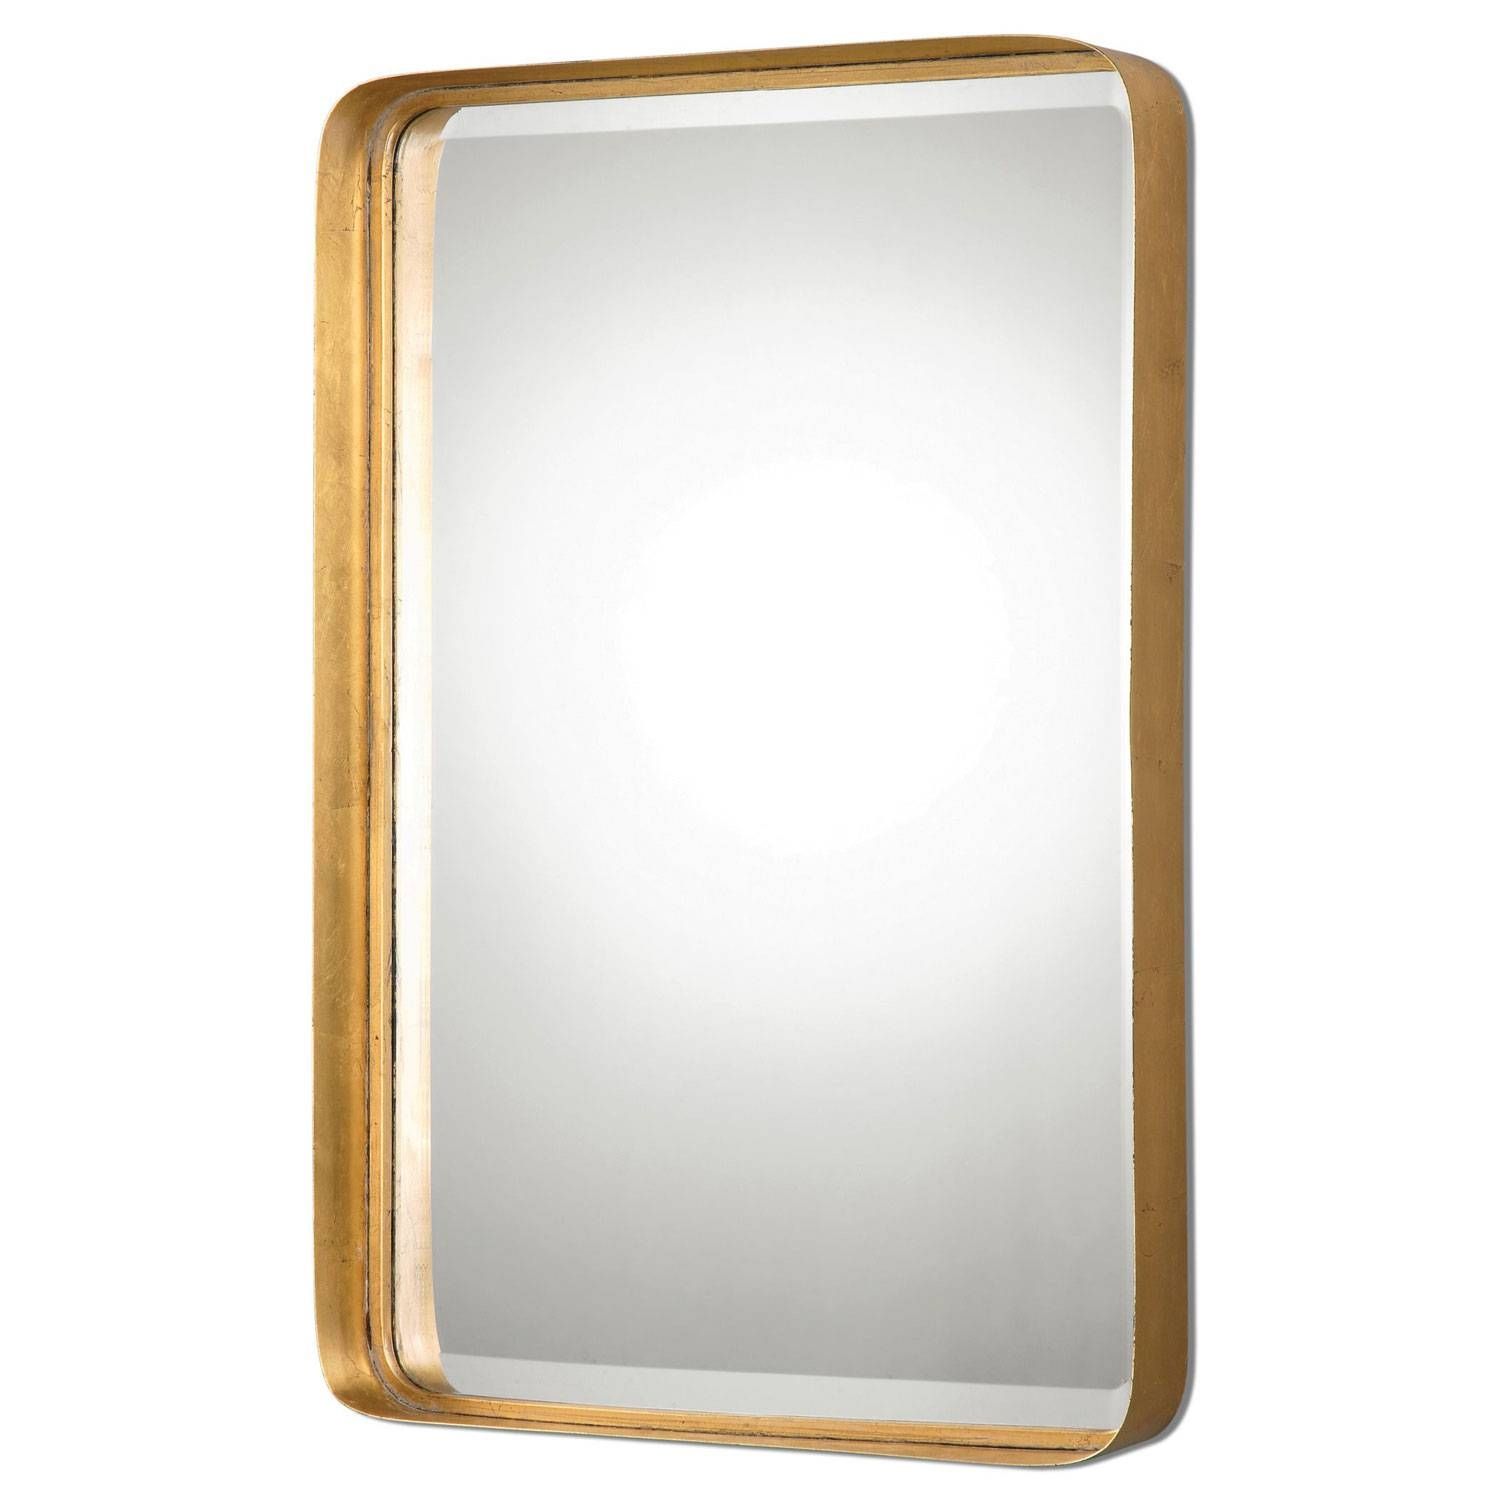 Contemporary Mirrors | Bellacor In Iron Framed Mirrors (View 18 of 25)